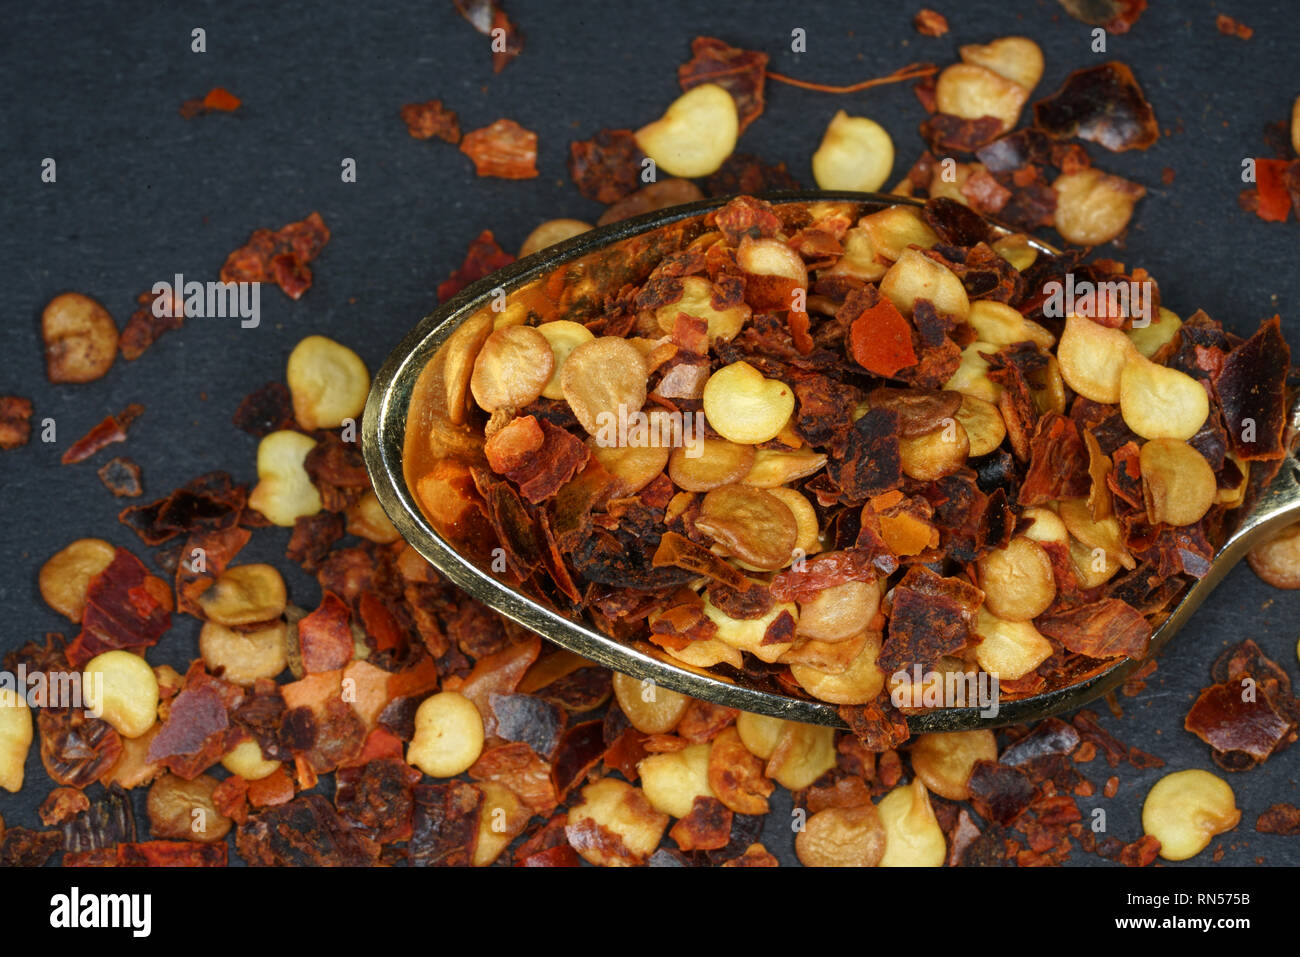 The chili spice is considered the hottest chili spice ever. This sharpness can only be topped if different chili spices are mixed. Stock Photo